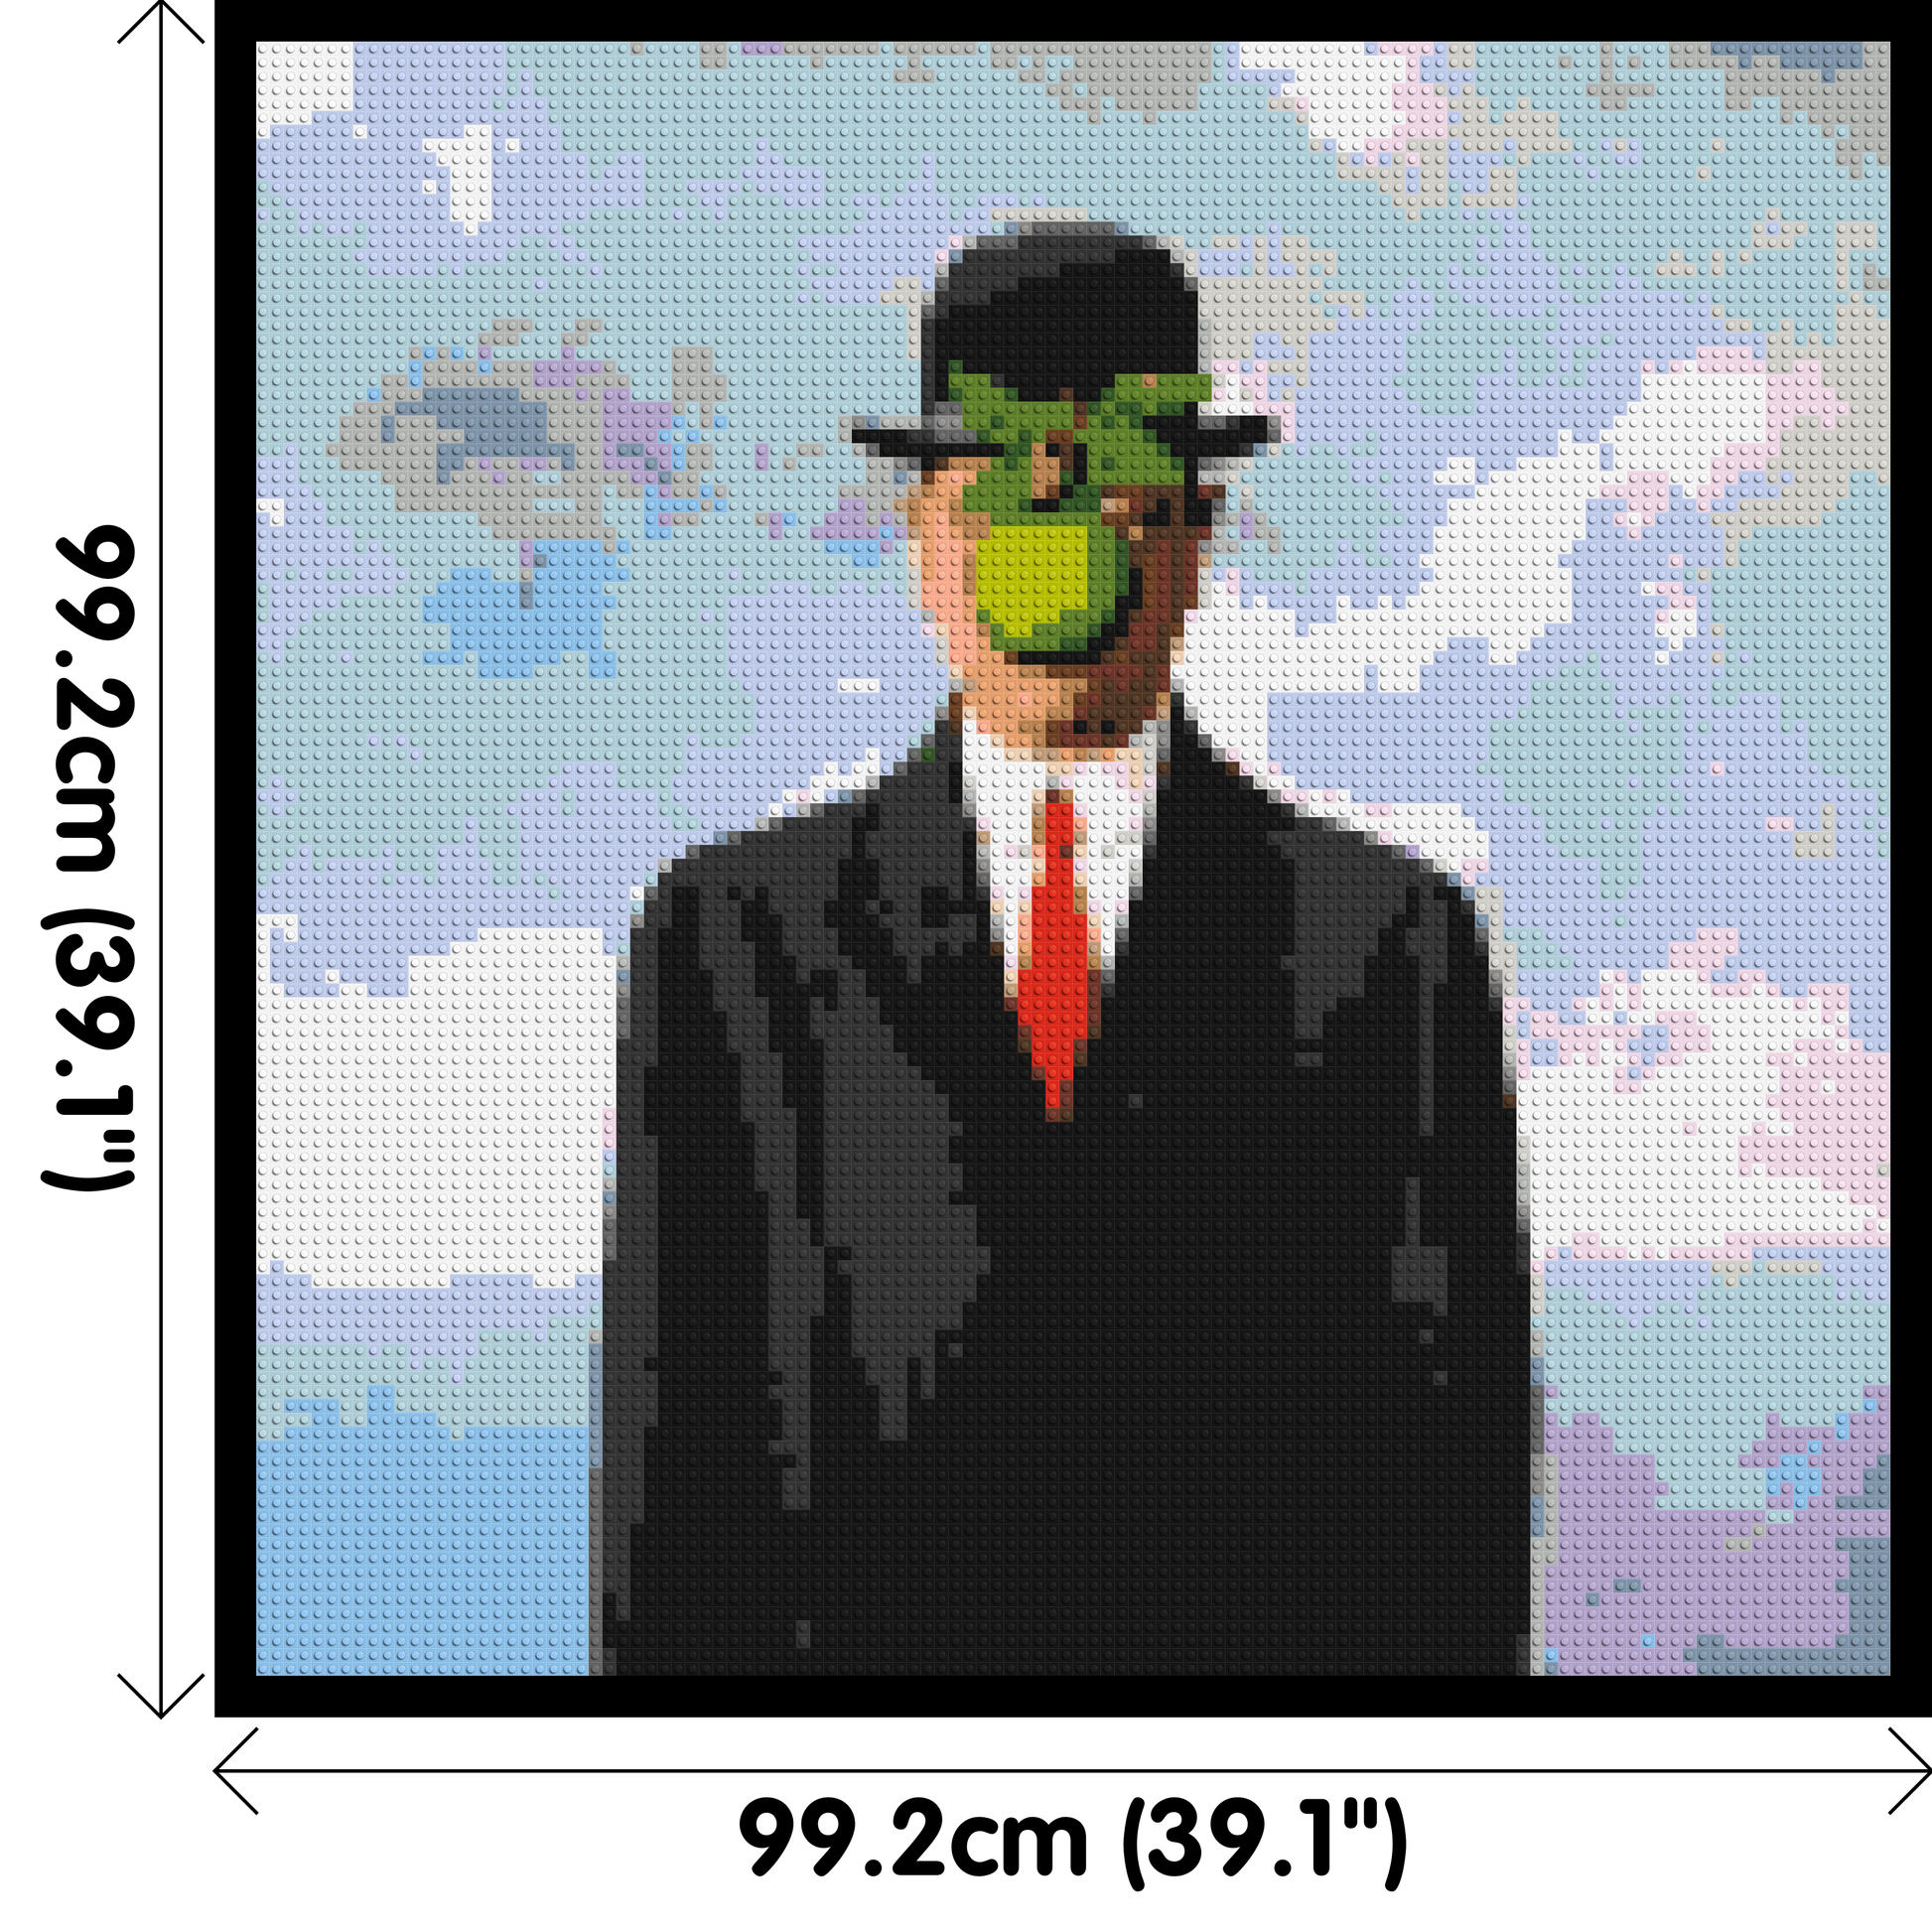 The Son of Man by René Magritte - Brick Art Mosaic Kit 5x5 dimensions with frame